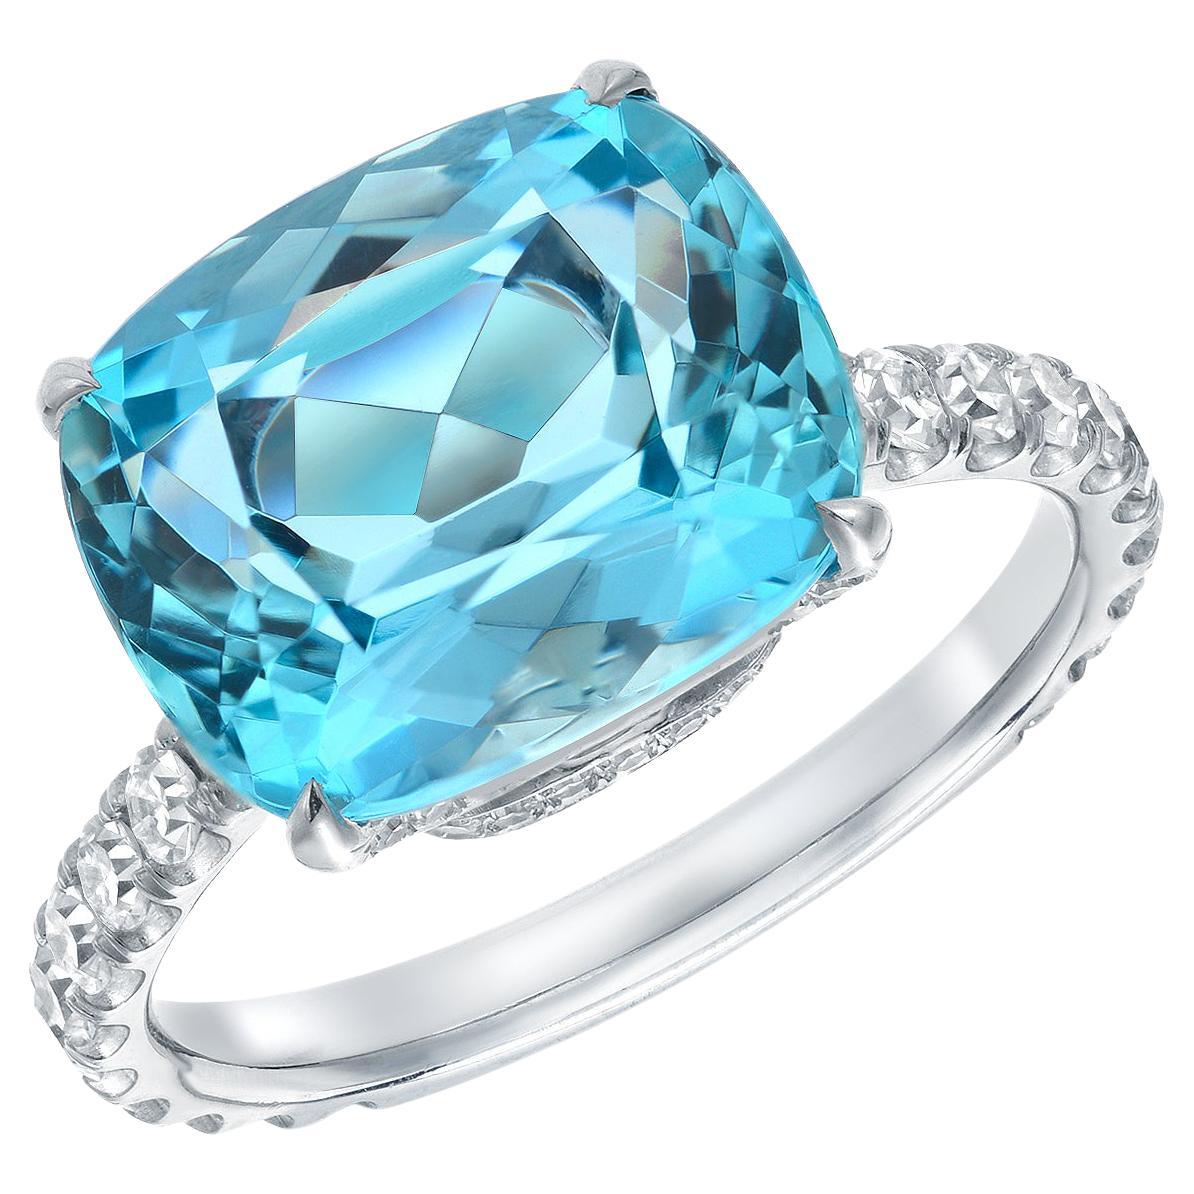 Aquamarine ring showcasing a marvelous 5.11 carat cushion cut, set in a classic 0.85 carat total, diamond and platinum ring. 
Ring size 6. Re-sizing is complimentary upon request.
Returns are accepted and paid by us within 7 days of